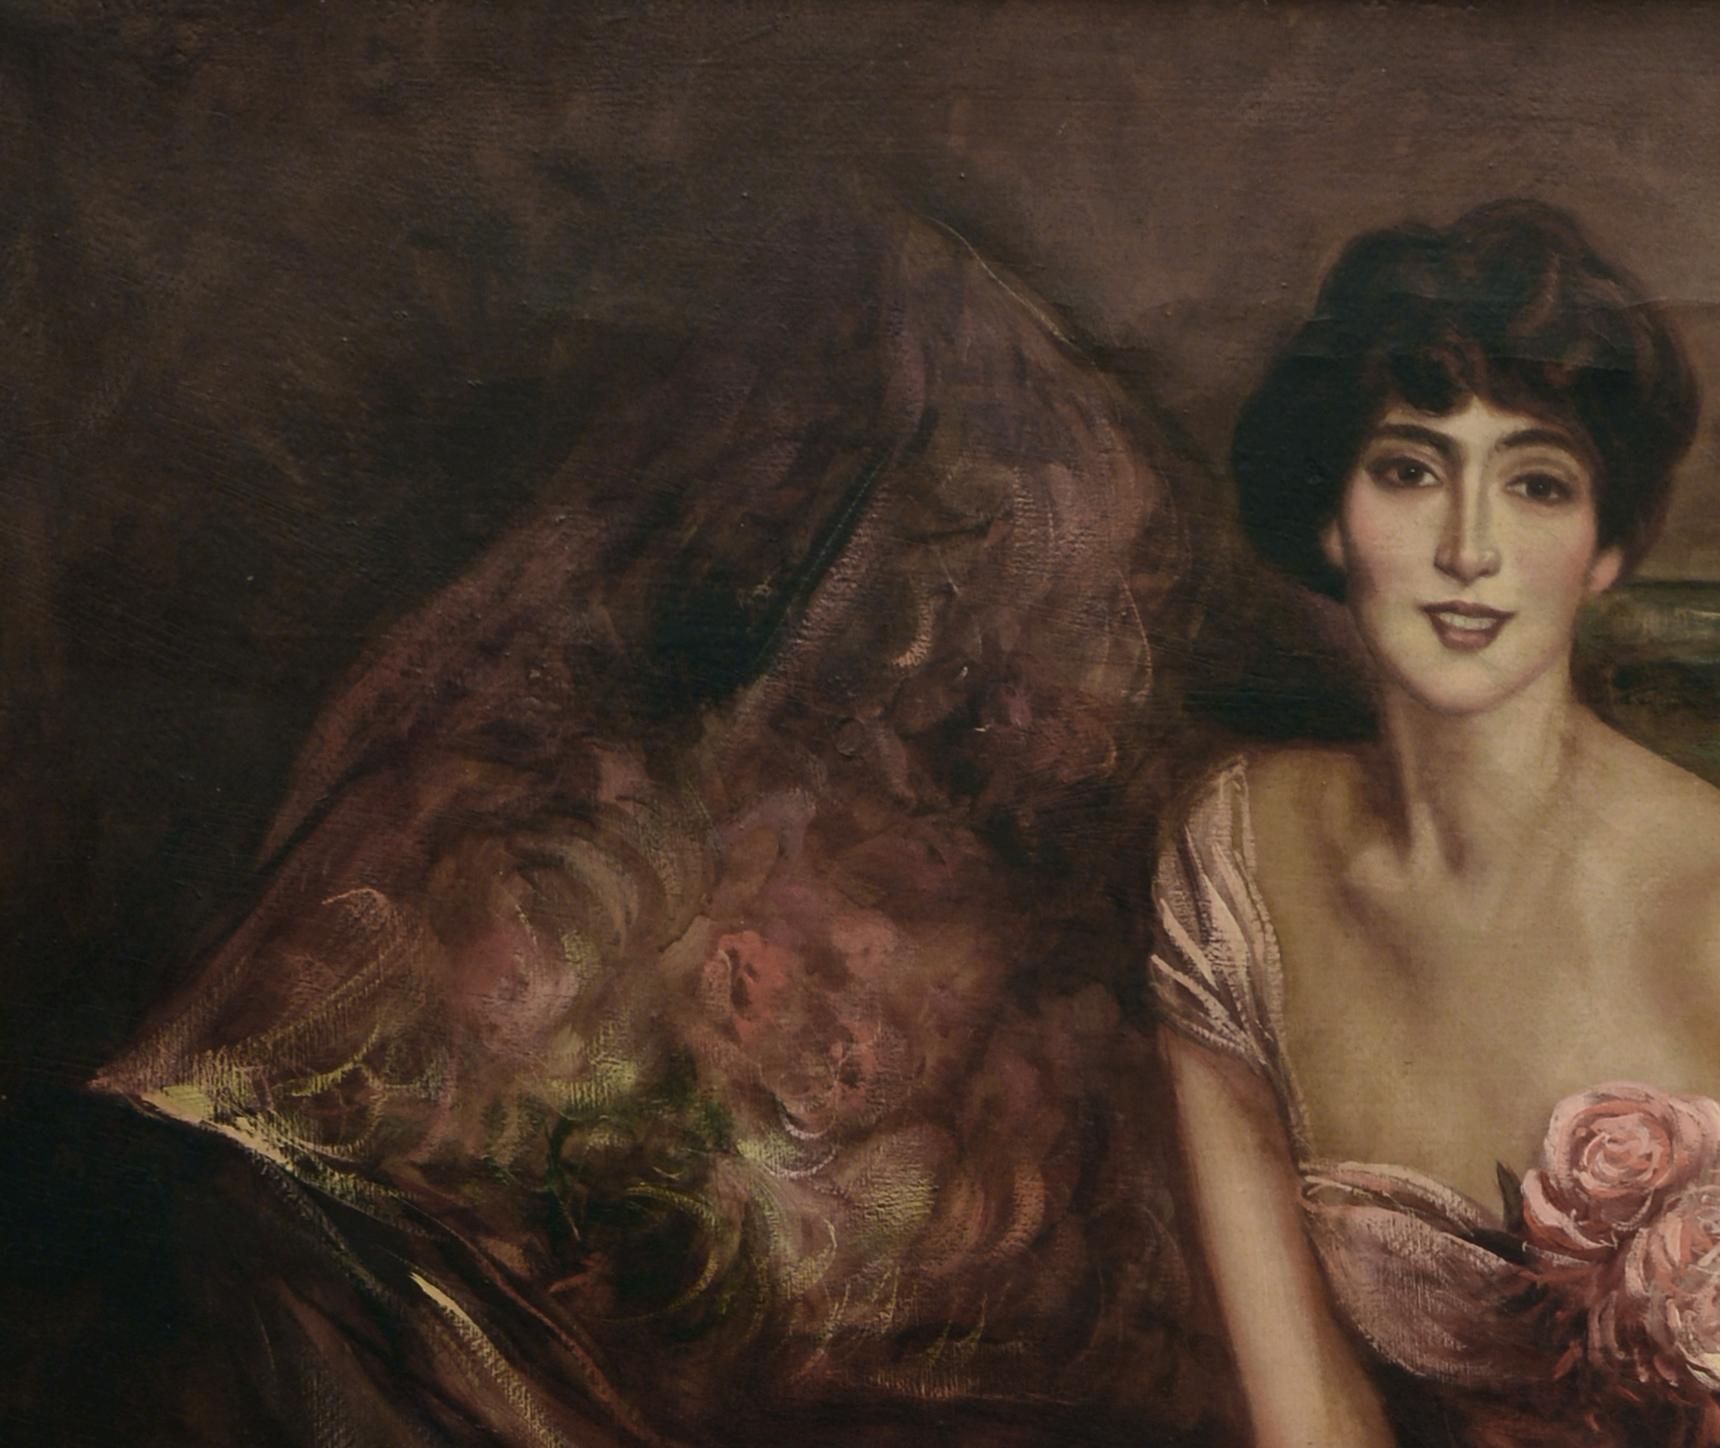 LADY'S PORTRAIT- In the Manner of G. Boldini -  Italian Oil on Canvasv Painting - Brown Portrait Painting by Ciro De Rosa